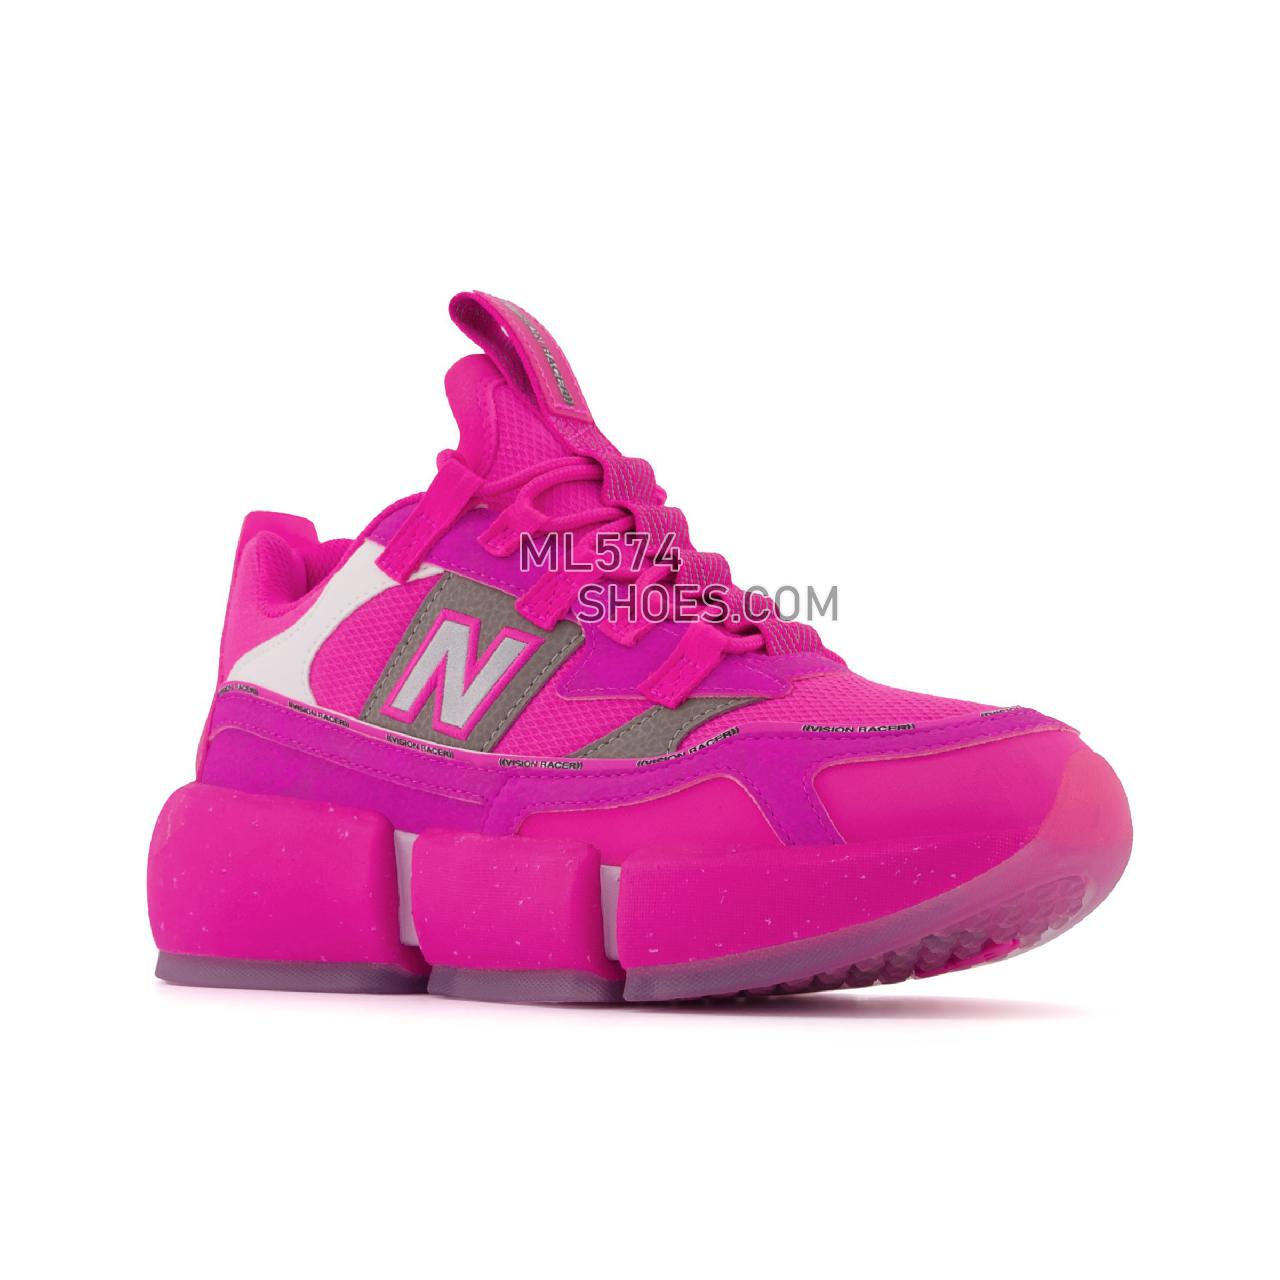 New Balance Vision Racer - Unisex Men's Women's Sport Style Sneakers - Peony with Black - MSVRCJSC